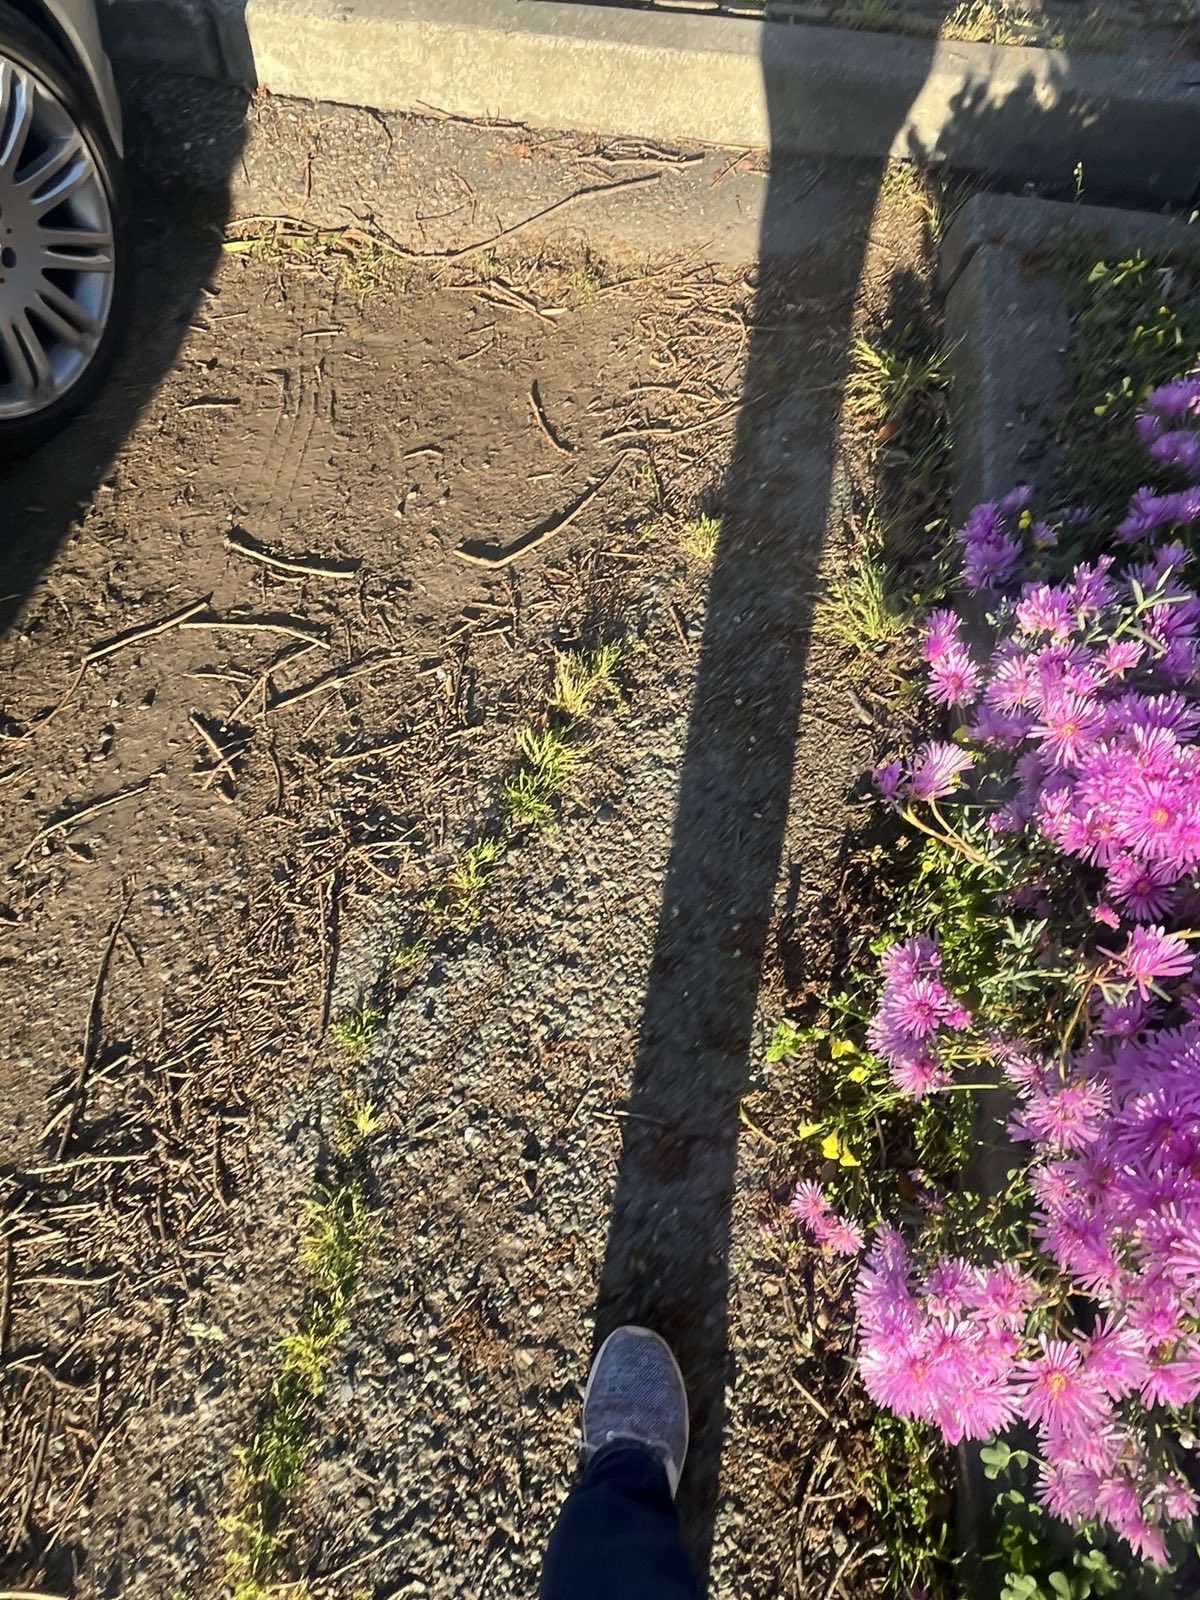 A sneakered foot in a gravel parking lot with purple flowers on one side and a car tire on the other